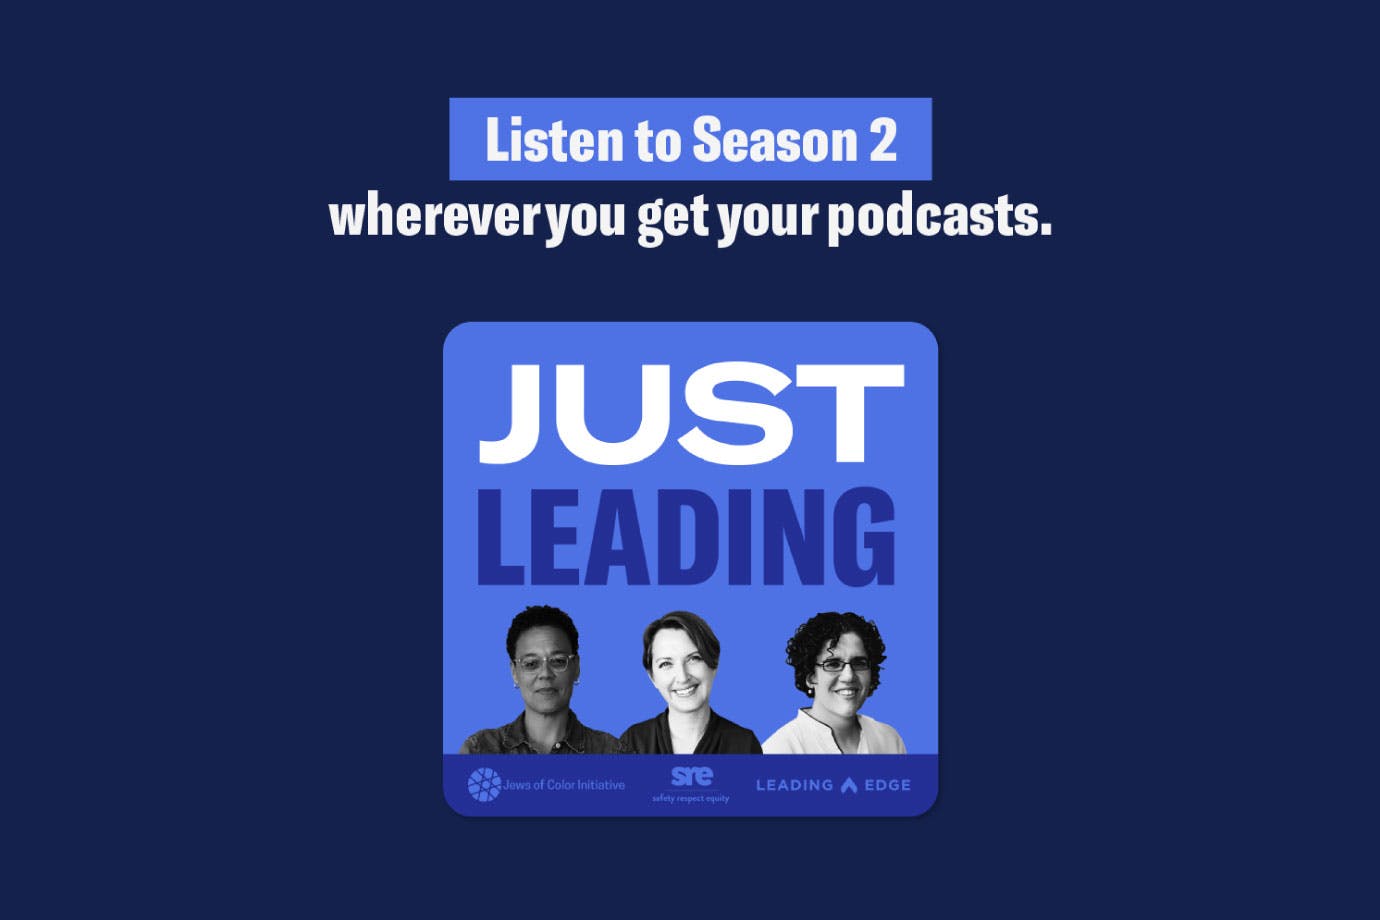 Listen to Season 2 wherever you get your podcast. Just Leading.